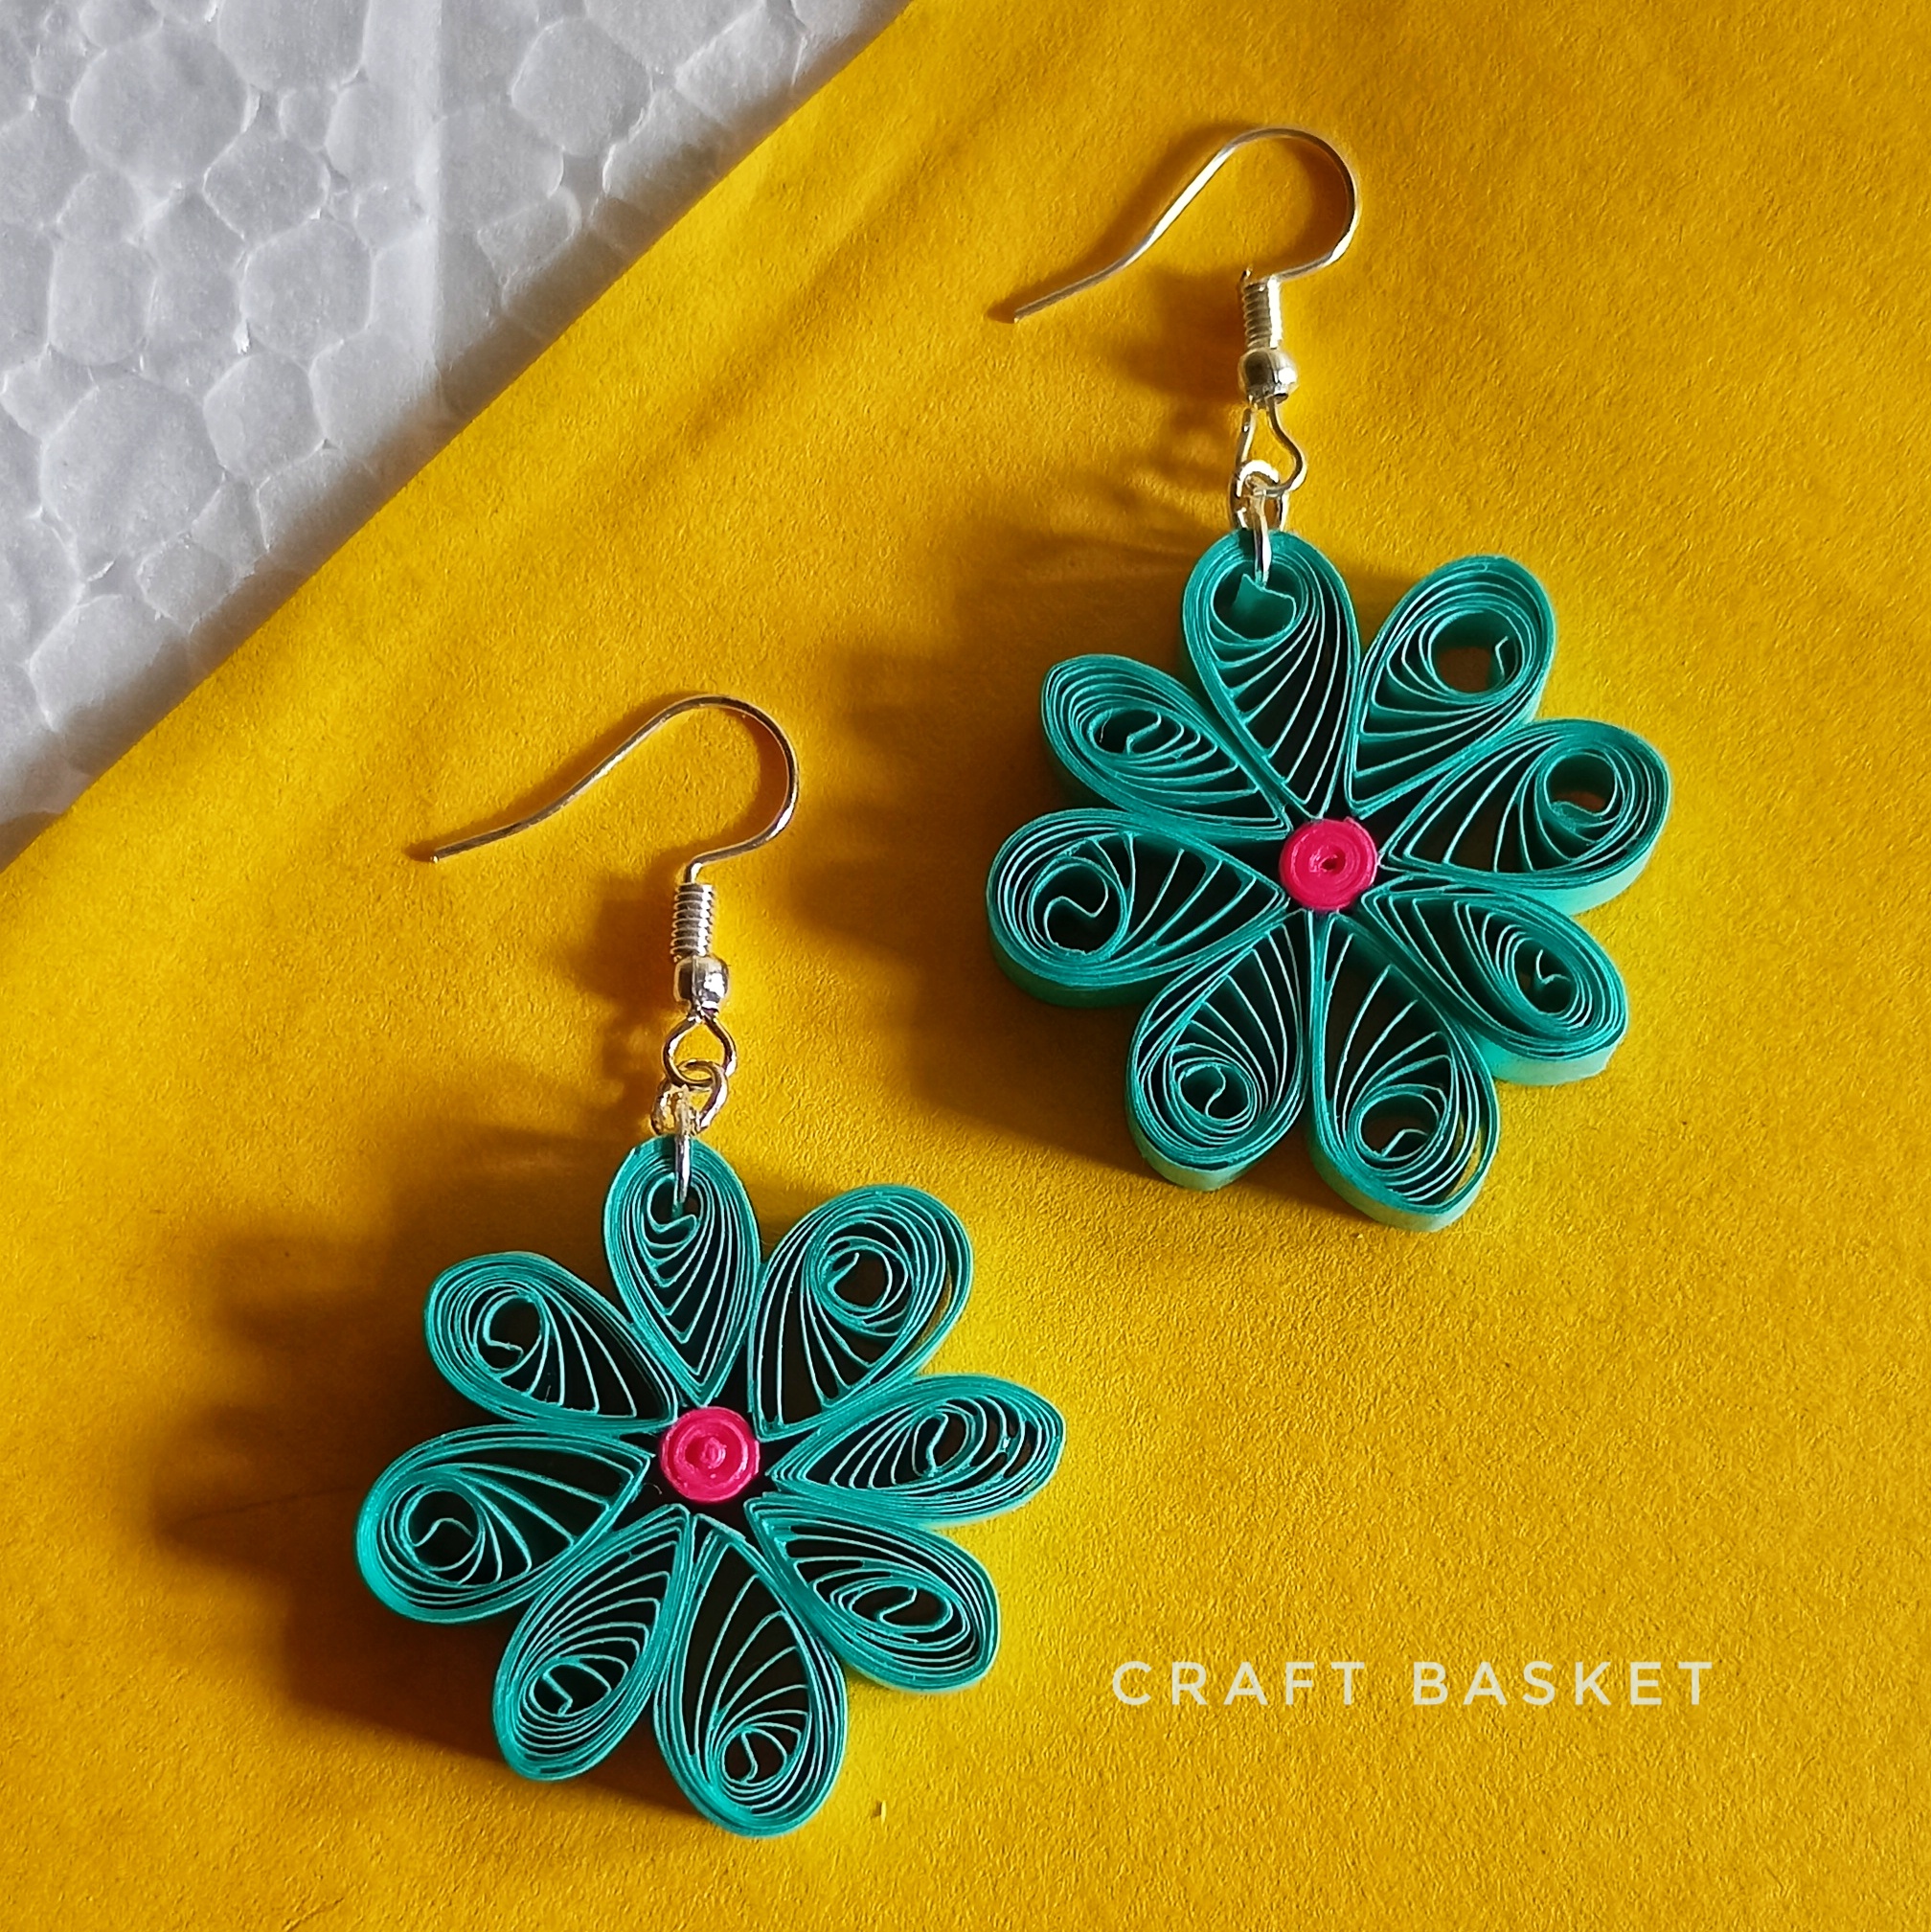 Quilling Crafts For Begginers  Quilling Earrings  quillingcrafts